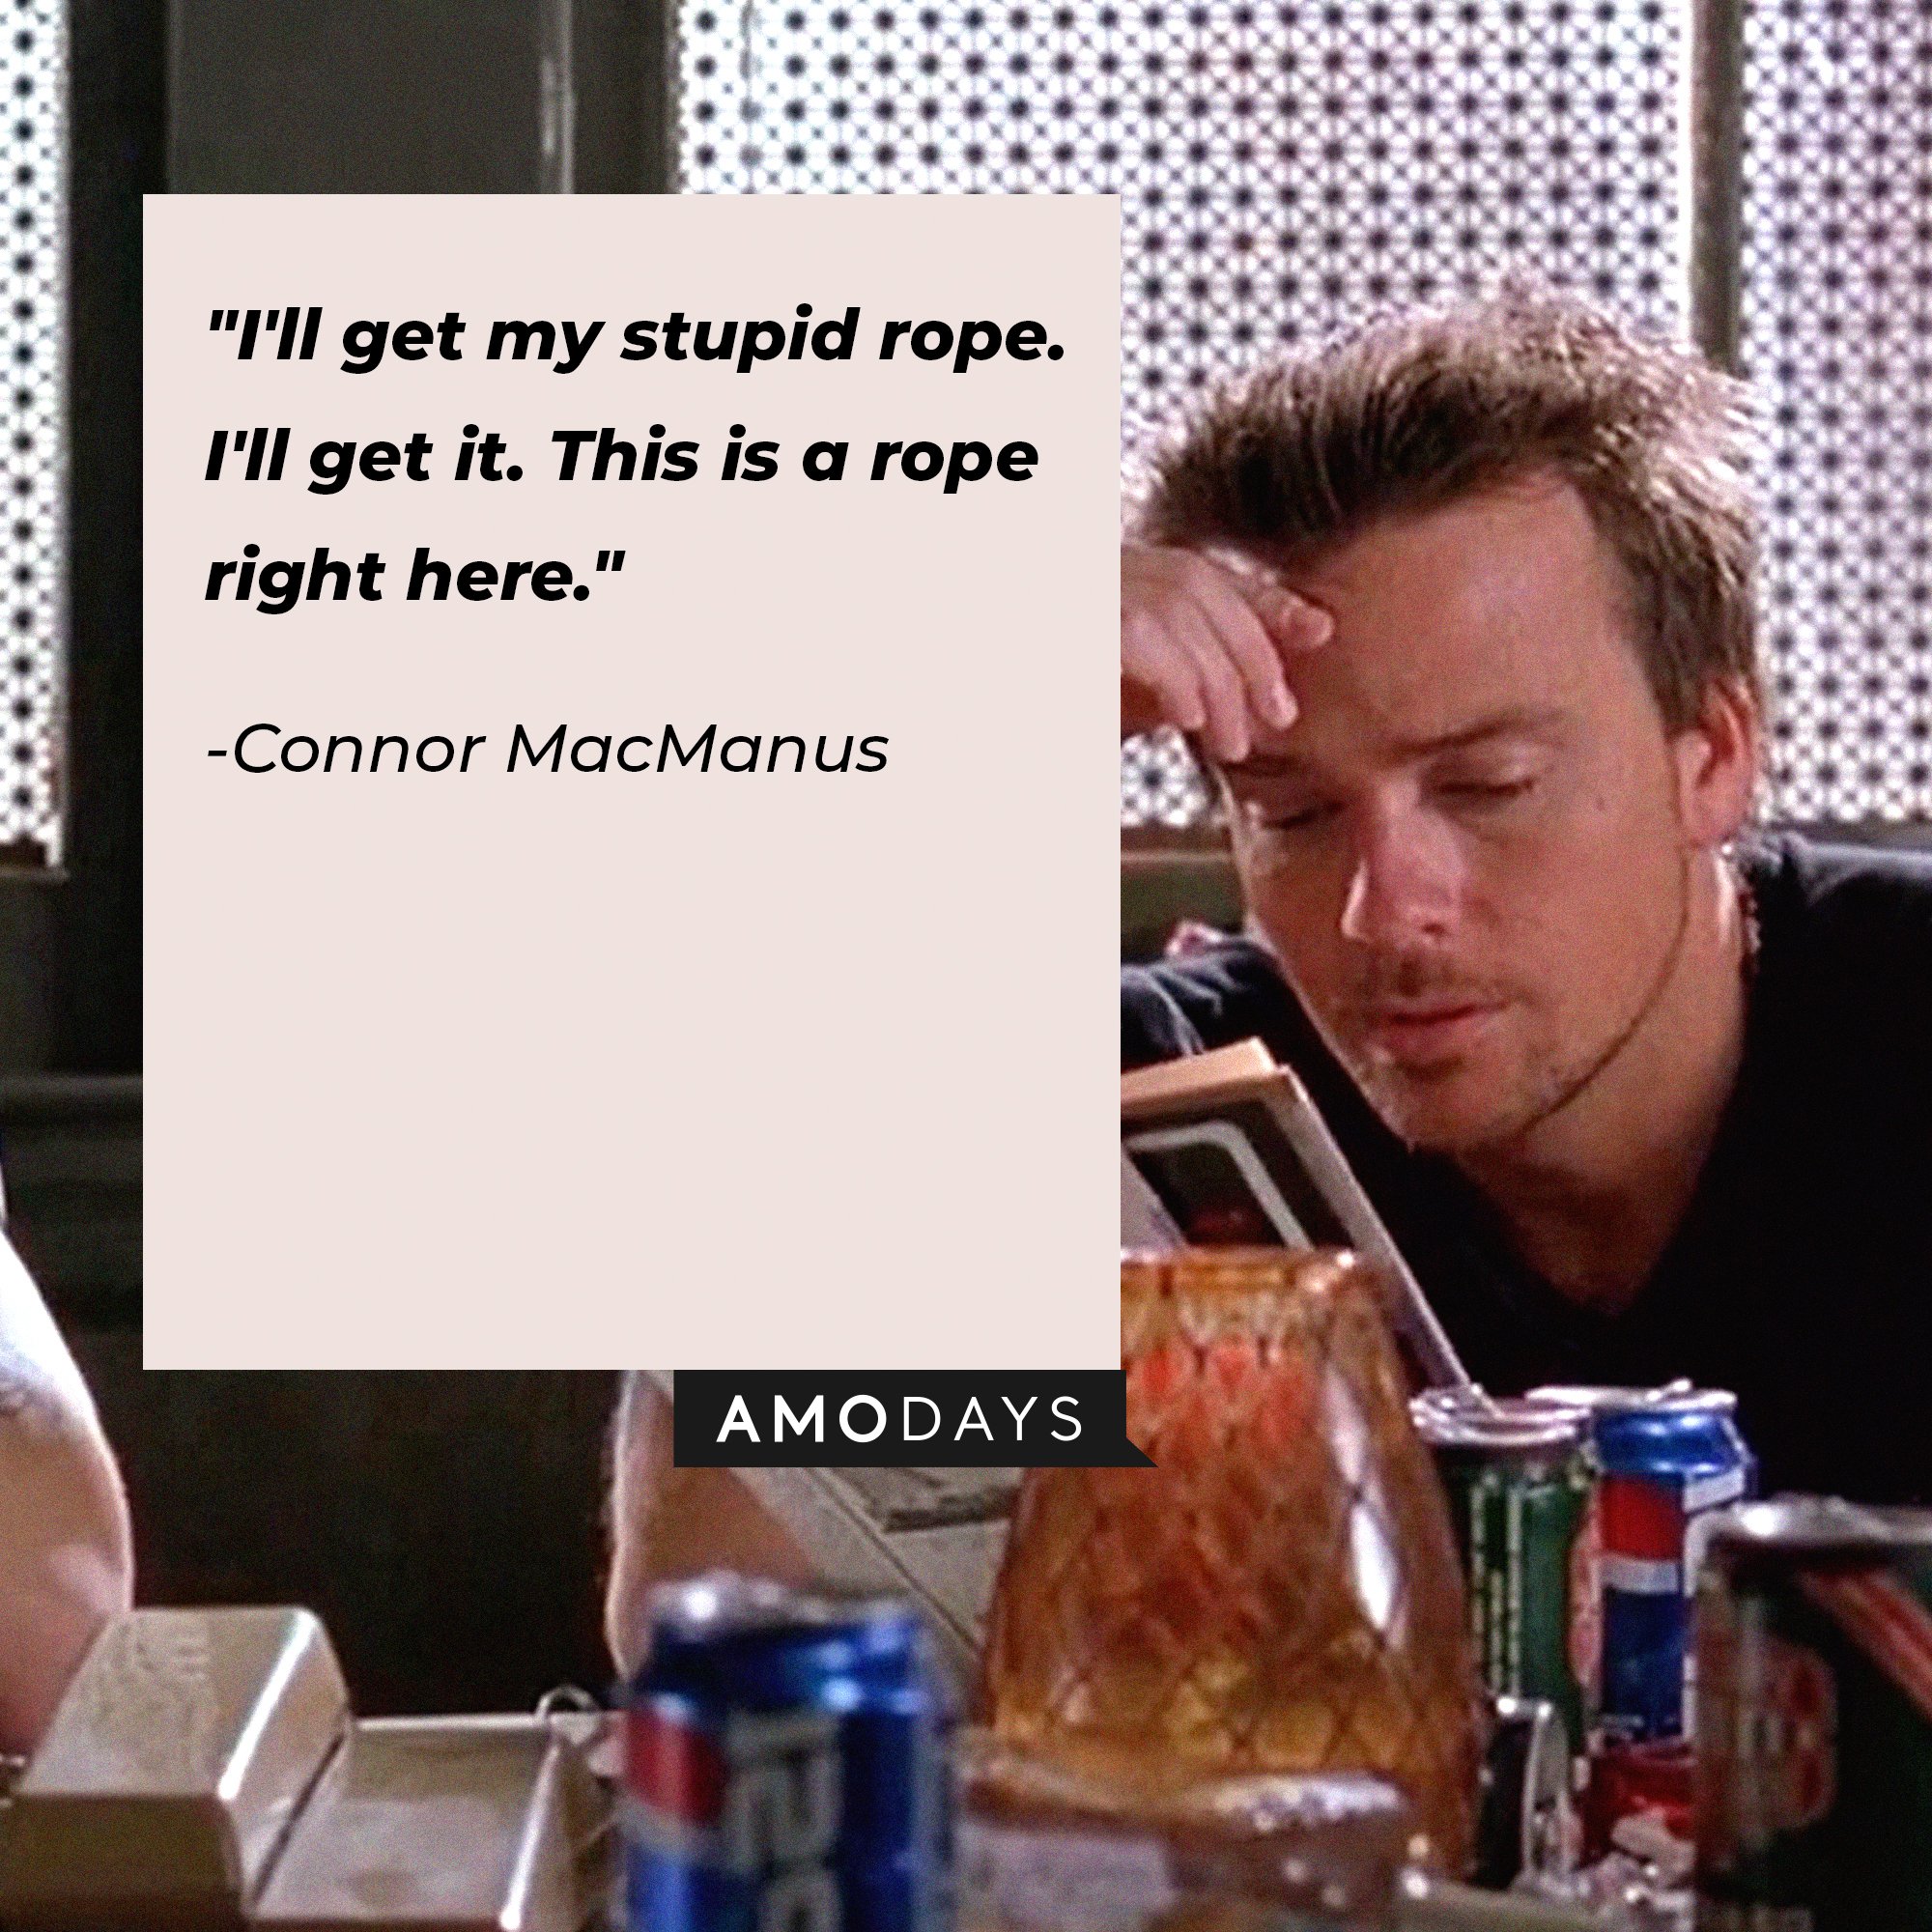 Connor MacManus' quote: "I'll get my stupid rope. I'll get it. This is a rope right here." | Image: AmoDays